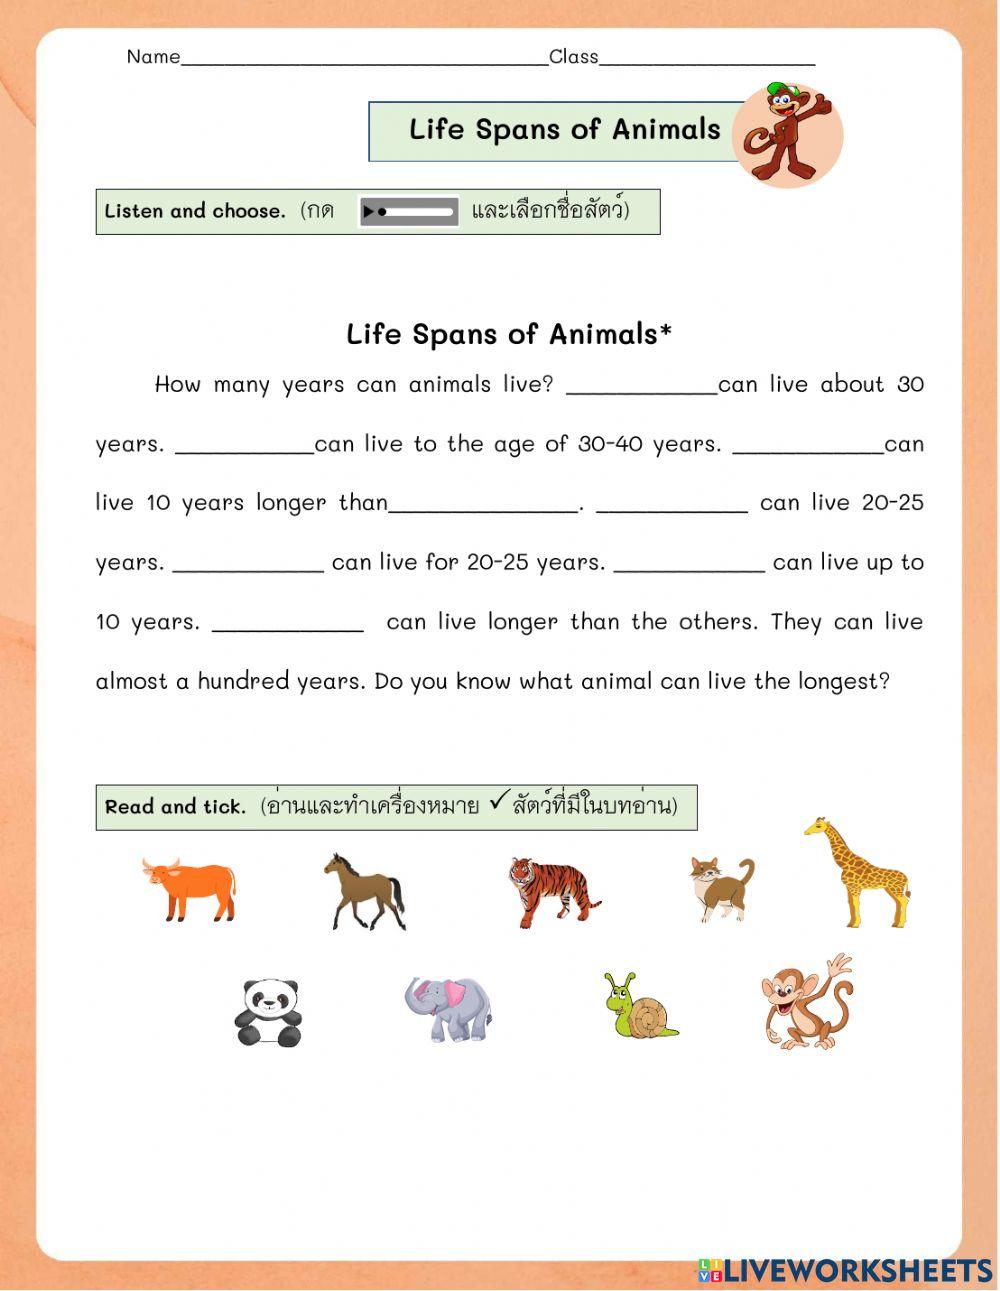 Life Spans of Animals